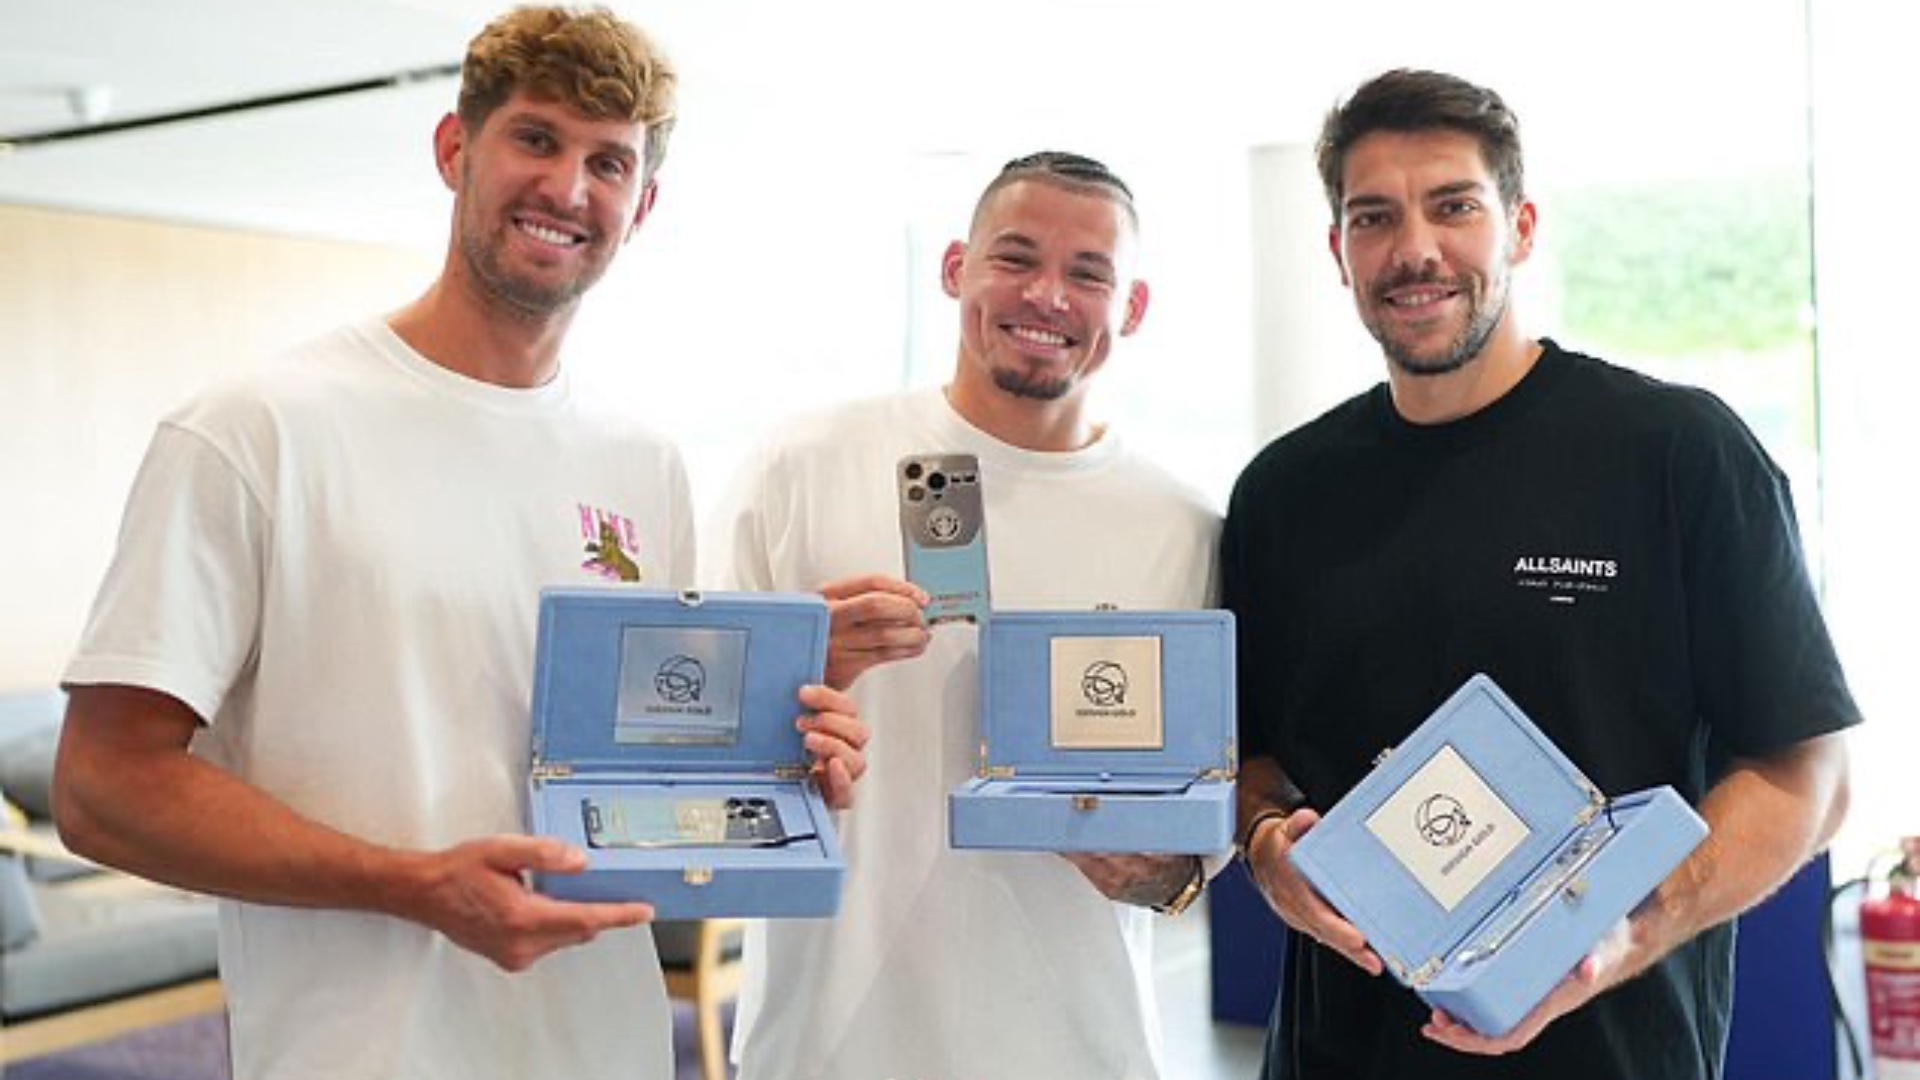 Manchester City players with custom iPhones